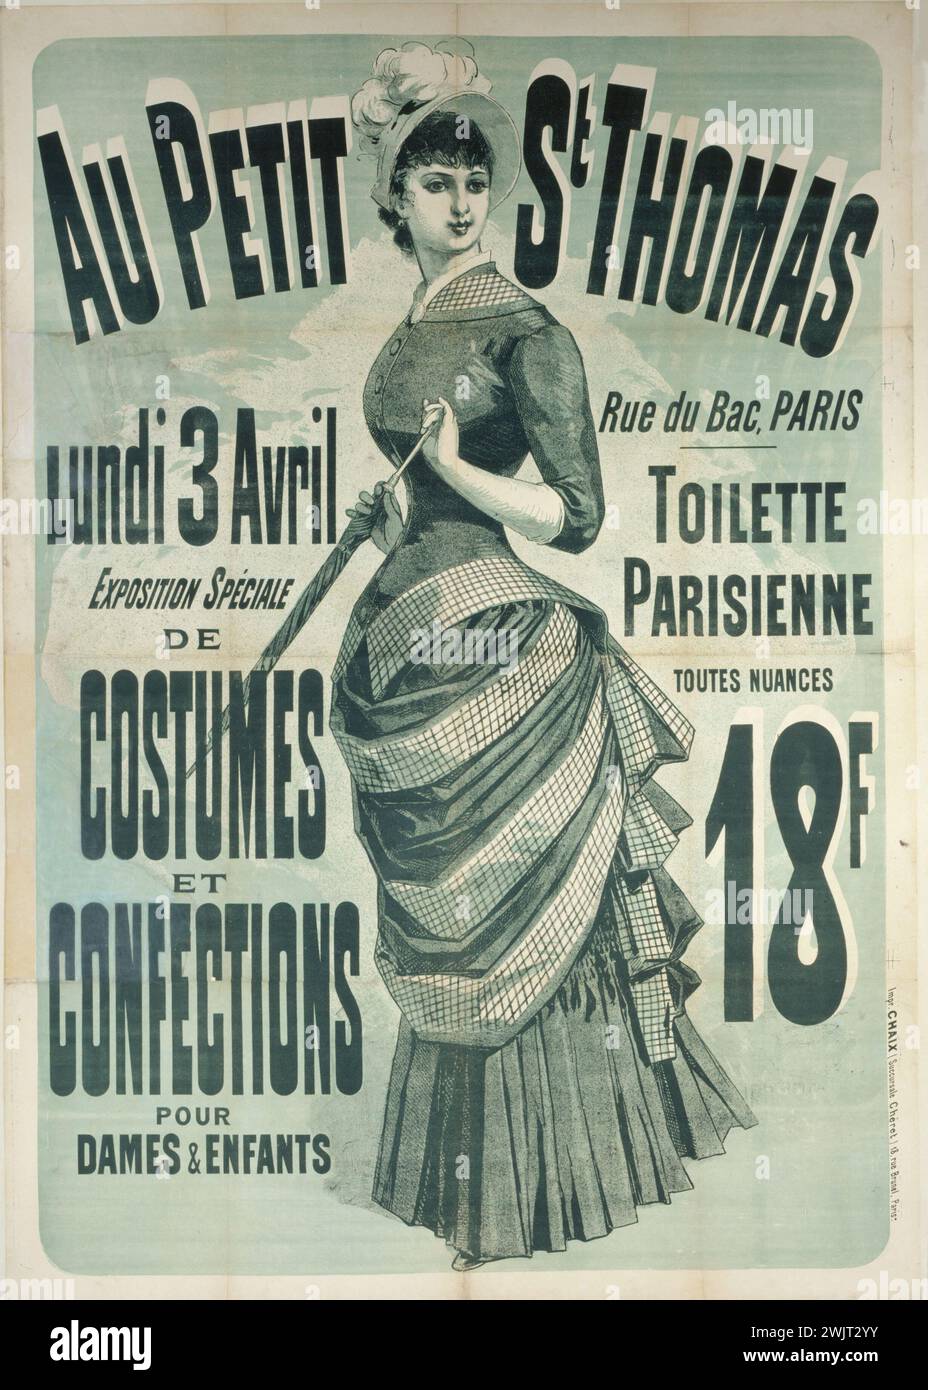 At Petit Saint -Thomas - Rue du Bac, Special Exhibition of Costumes and Confections for Ladies and Children ". Paris, Carnavalet museum. 27104-2 District VII, Au Petit Saint-Thomas, Confection, Costume, childish, special exhibition, store, mode, female fashion, advertising, rue de Bac, VII Eme 7th 7th Stock Photo